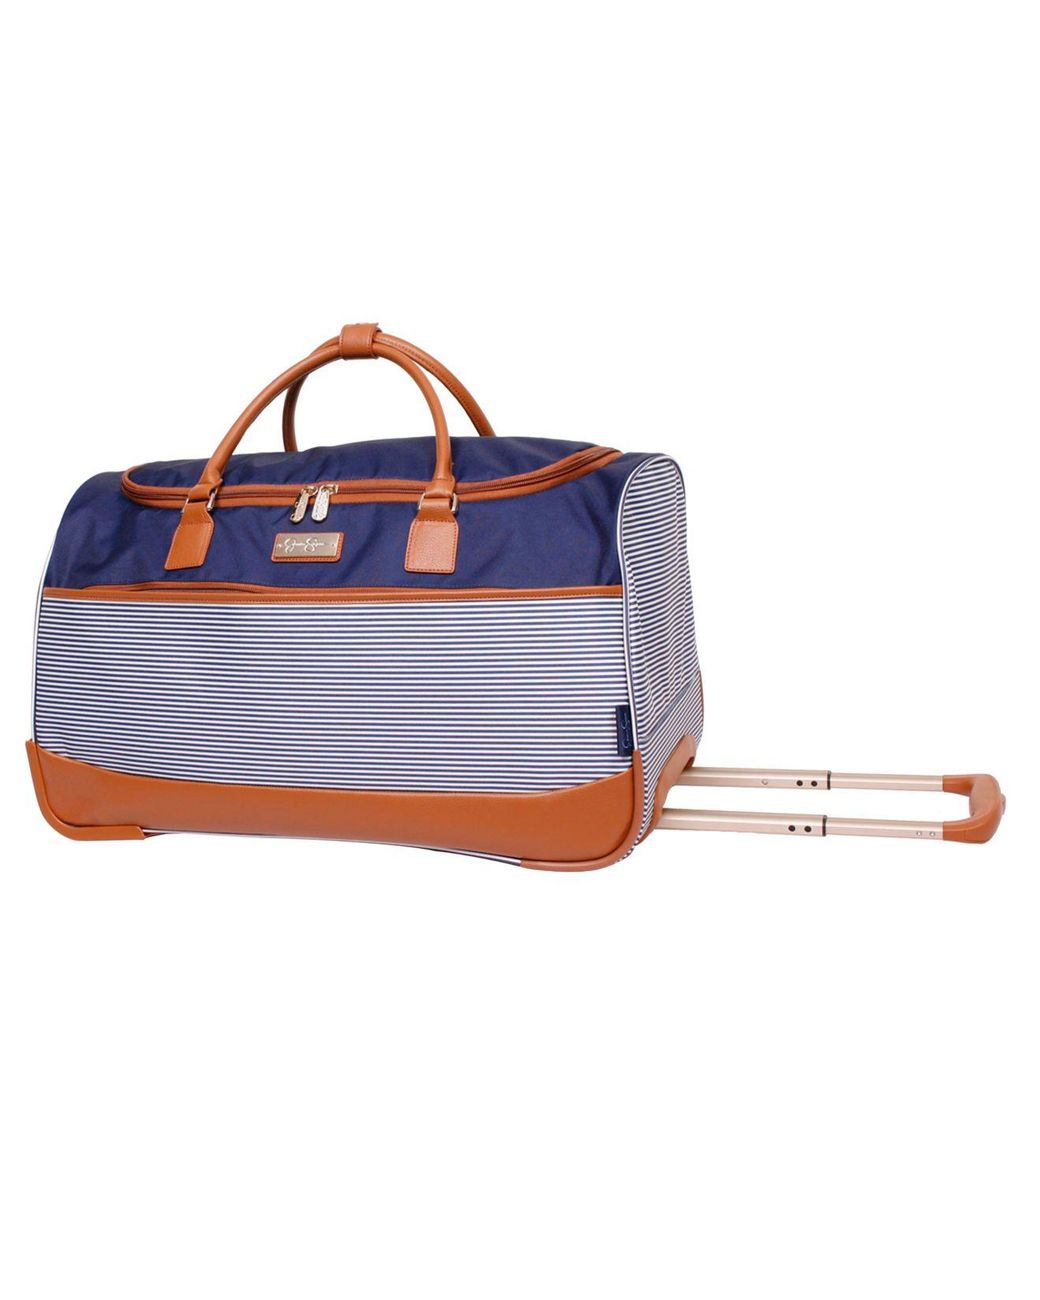 Jessica Simpson Synthetic Breton Pop Rolling Duffel Luggage in Navy/White  (Blue) | Lyst